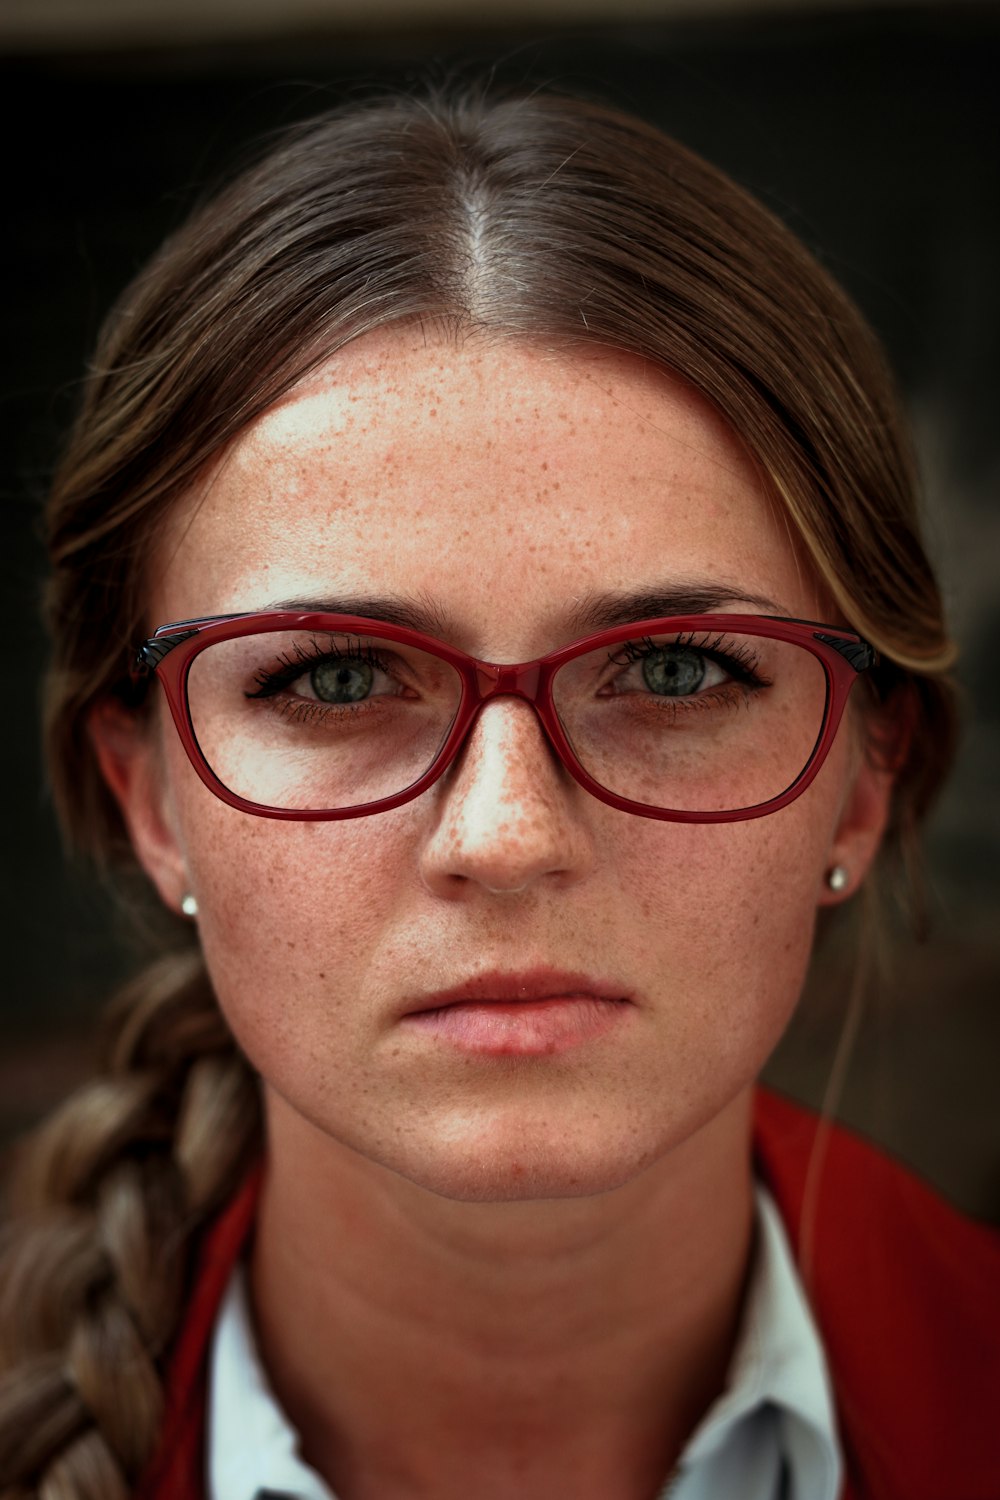 woman wearing eyeglasses with red frames